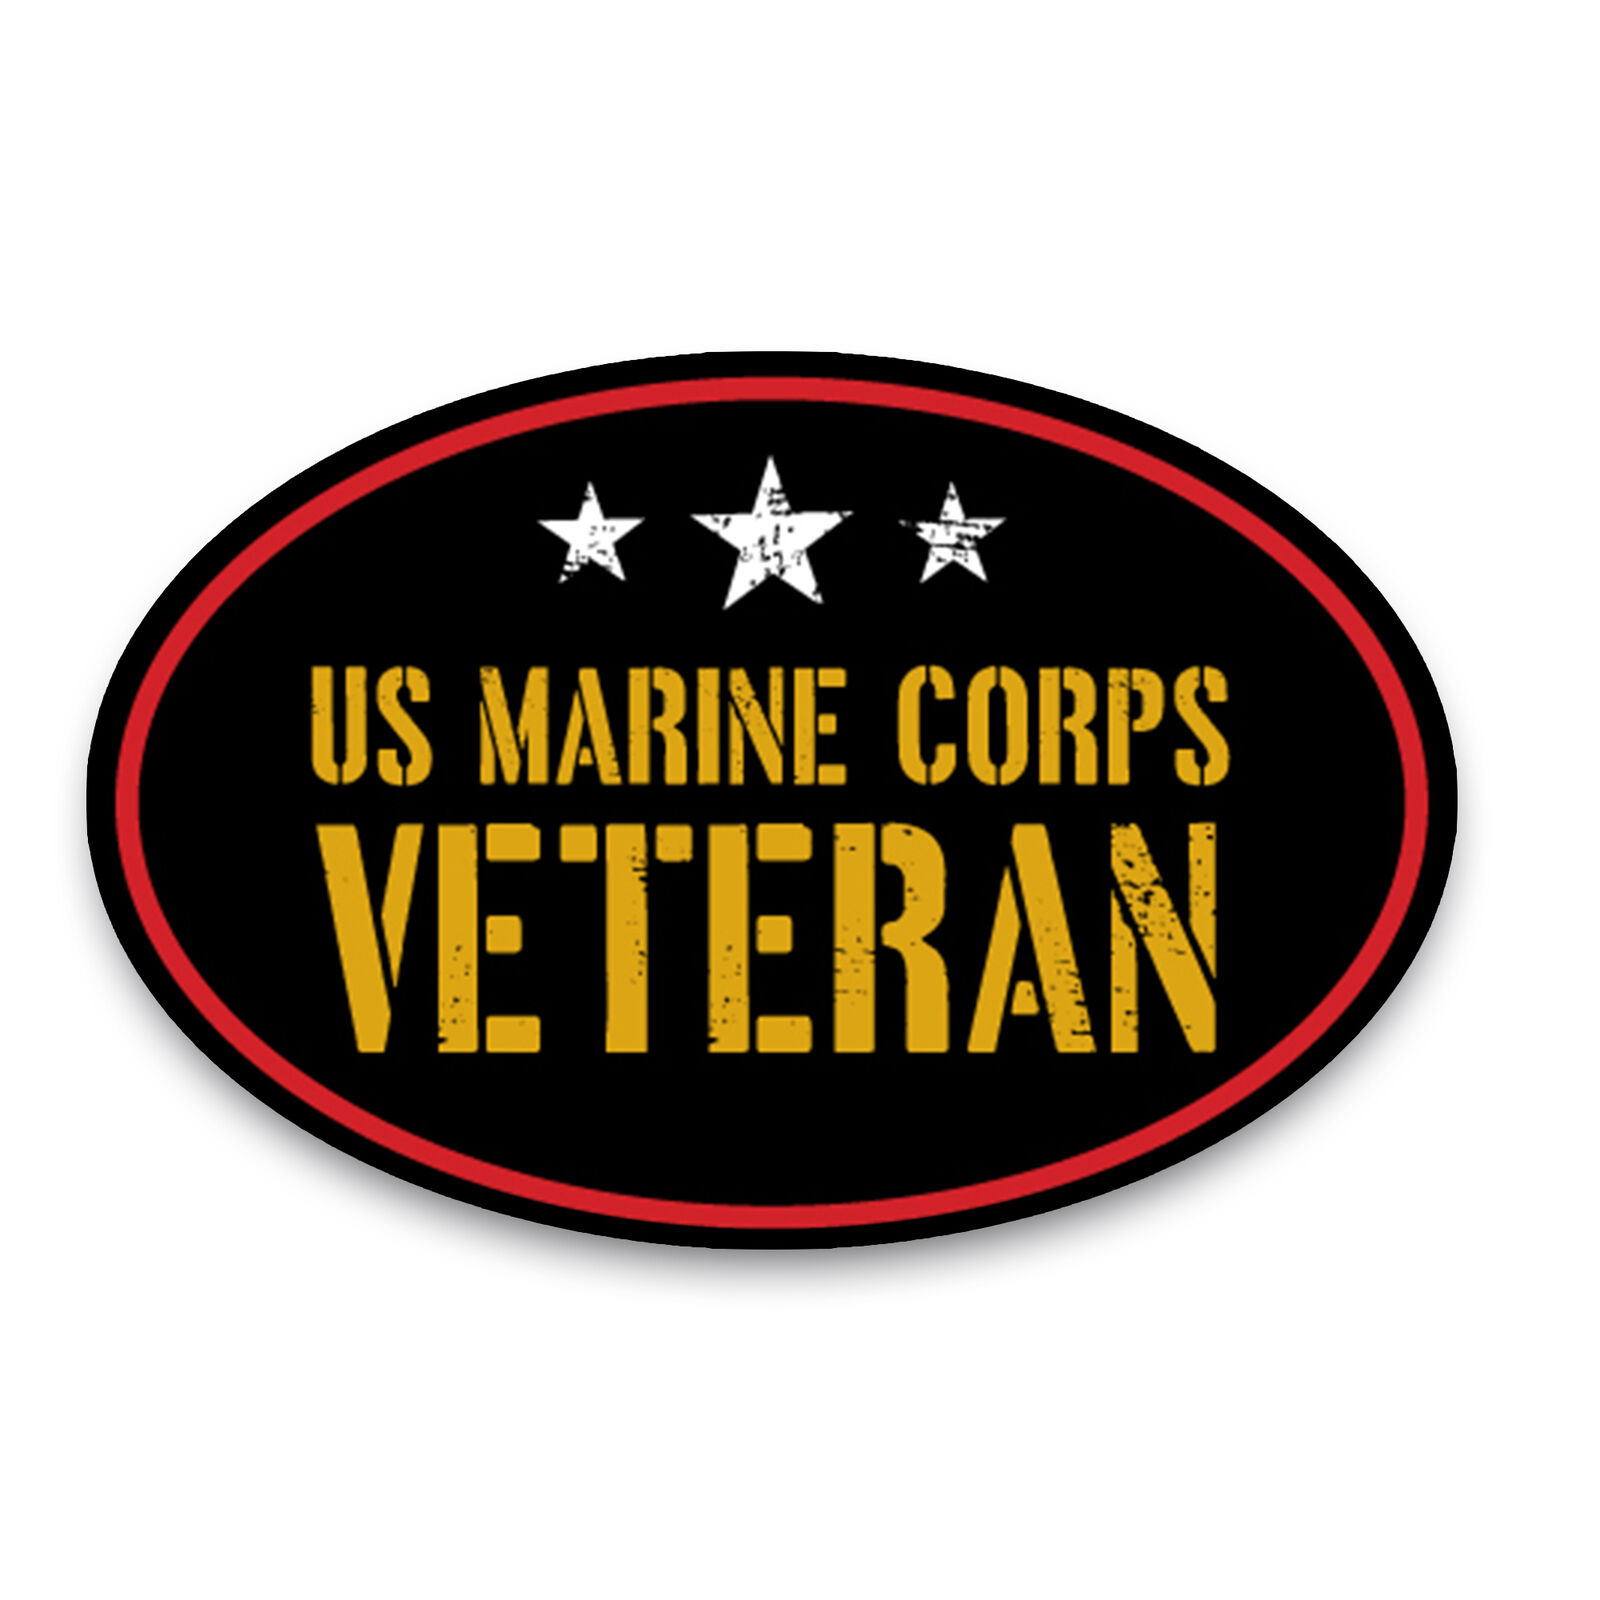 US Marine Corps Veteran Black Oval Magnet Decal, 4x6 Inches, Automotive Magnet